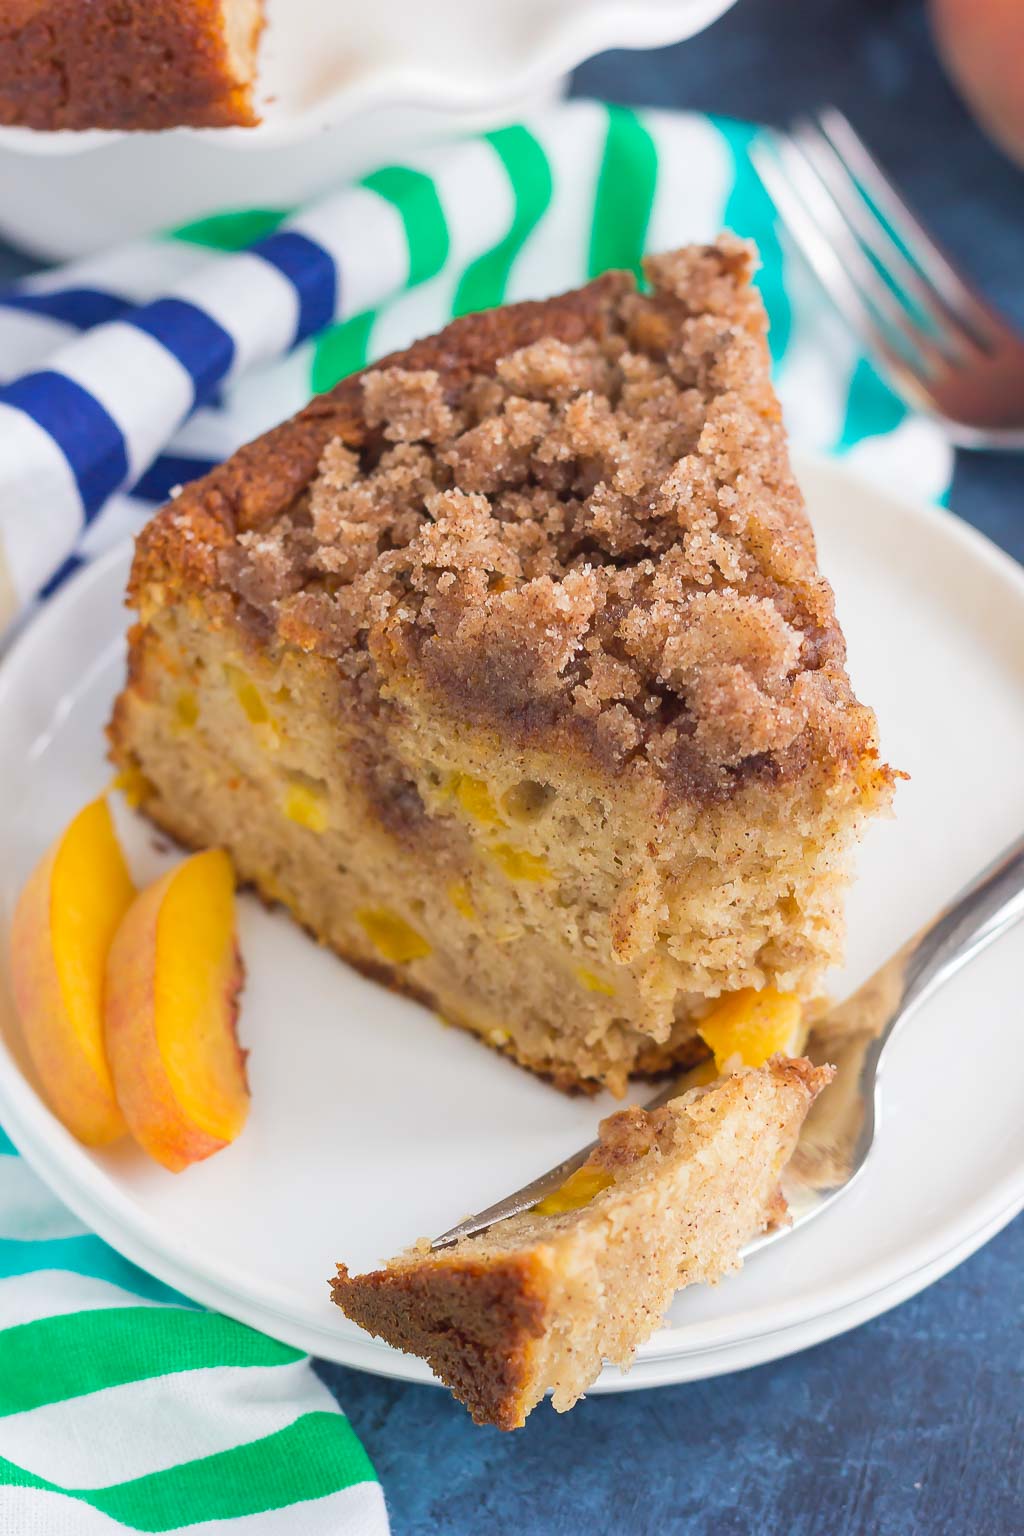 With juicy peaches, spices, and peach yogurt for extra taste and texture, this Fresh Peach Cake bakes up light, moist and delicious!